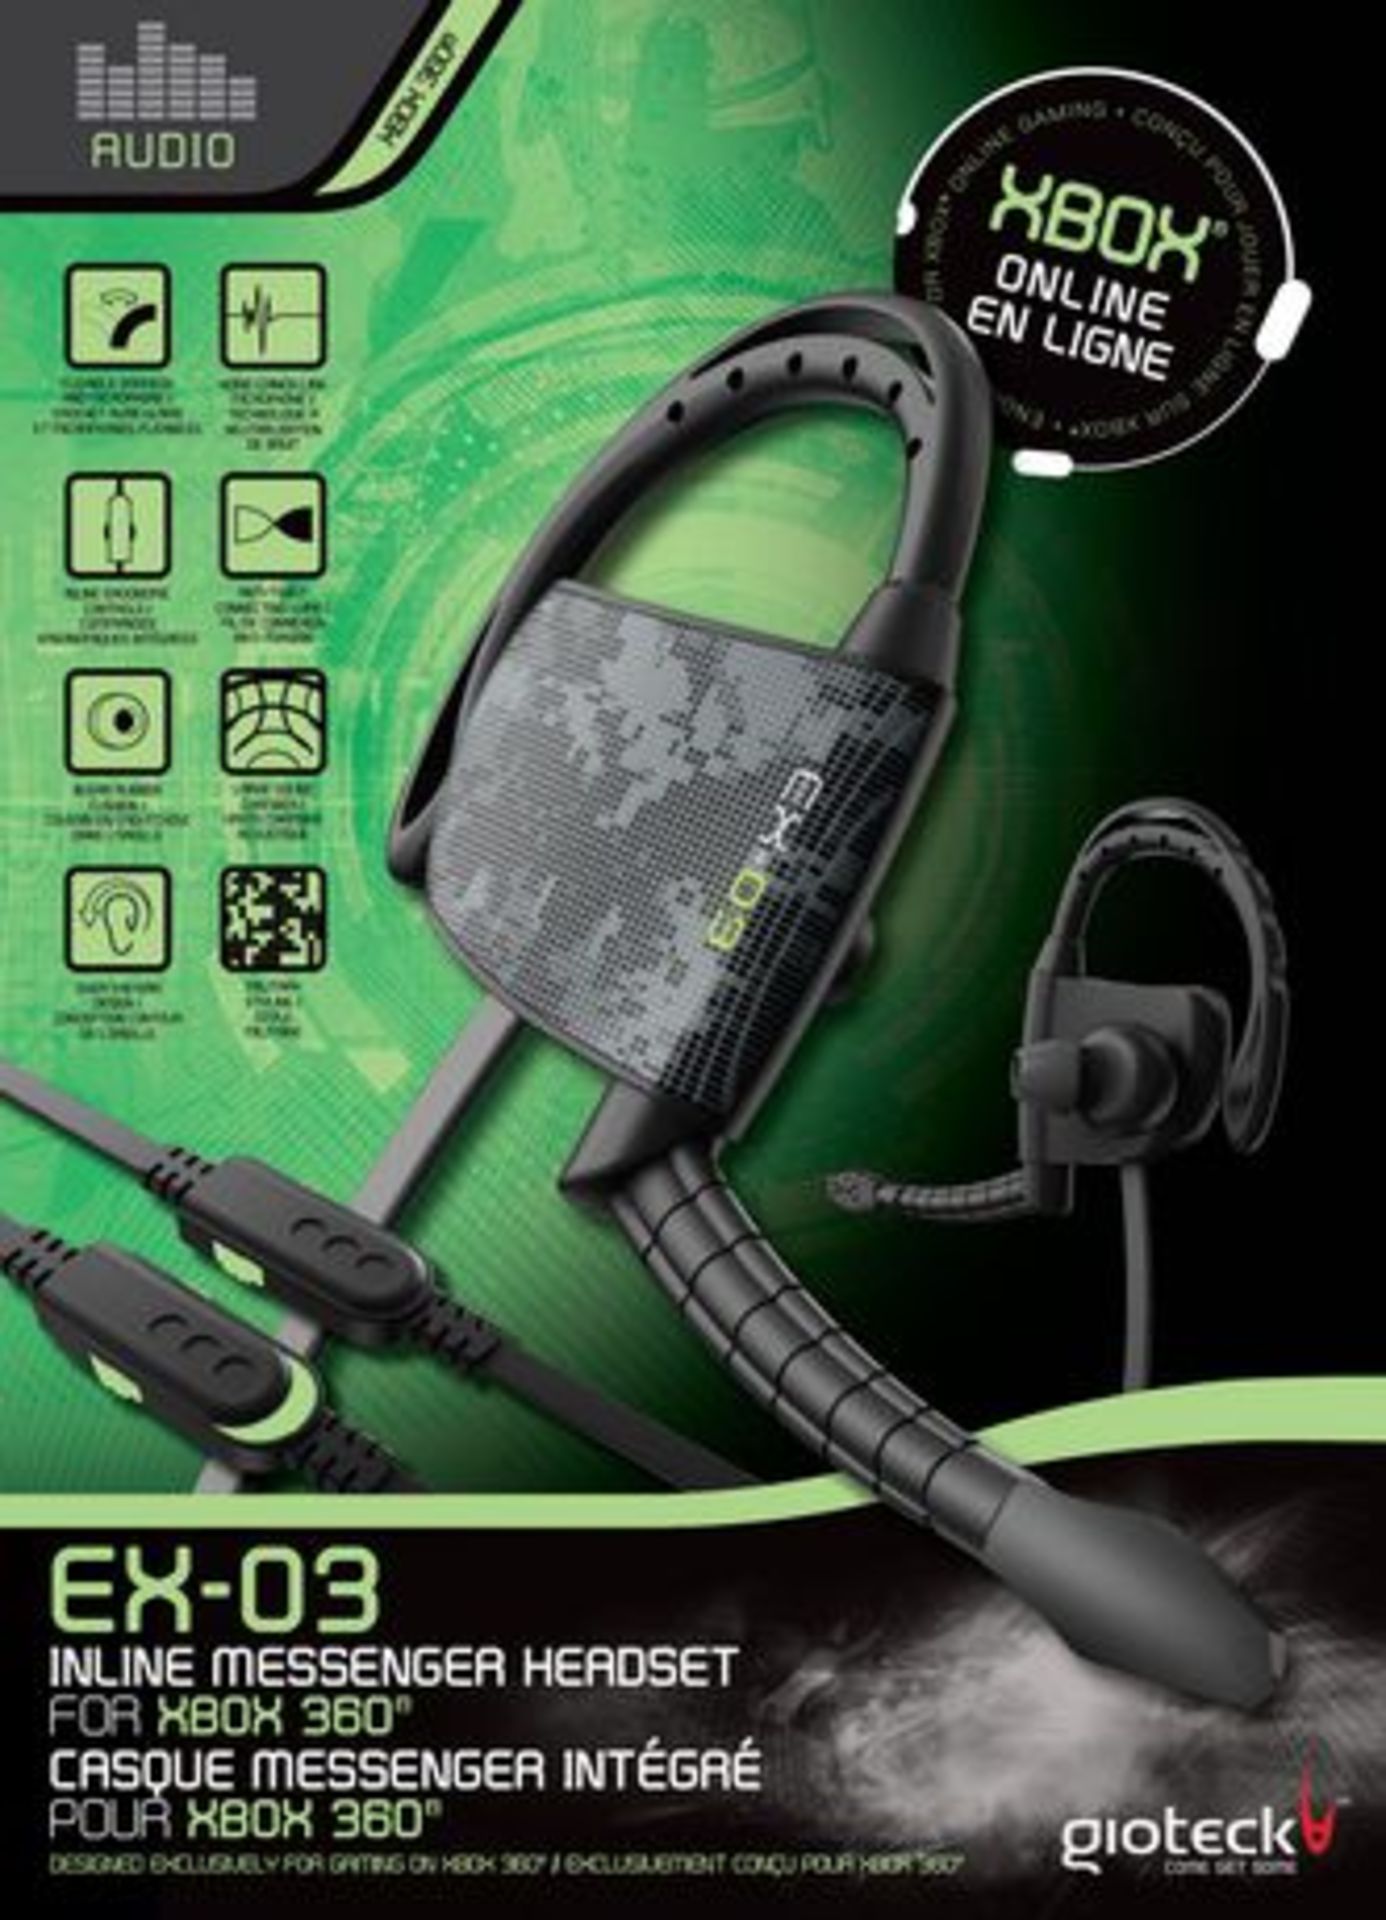 V Brand New Gioteck Ex-03 Online Messenger Headset For Xbox 360 X 2 YOUR BID PRICE TO BE